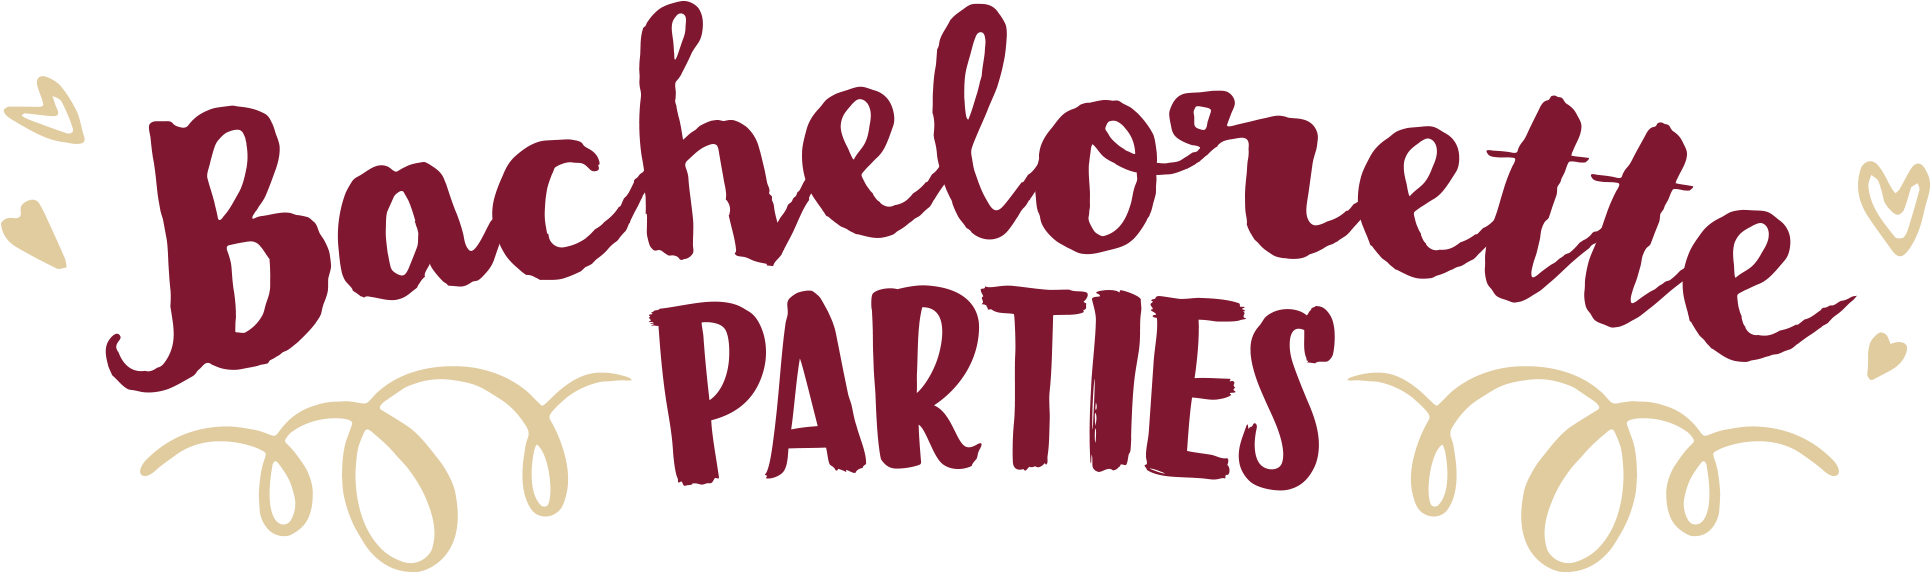 Bachelorette Parties Calligraphy PNG image